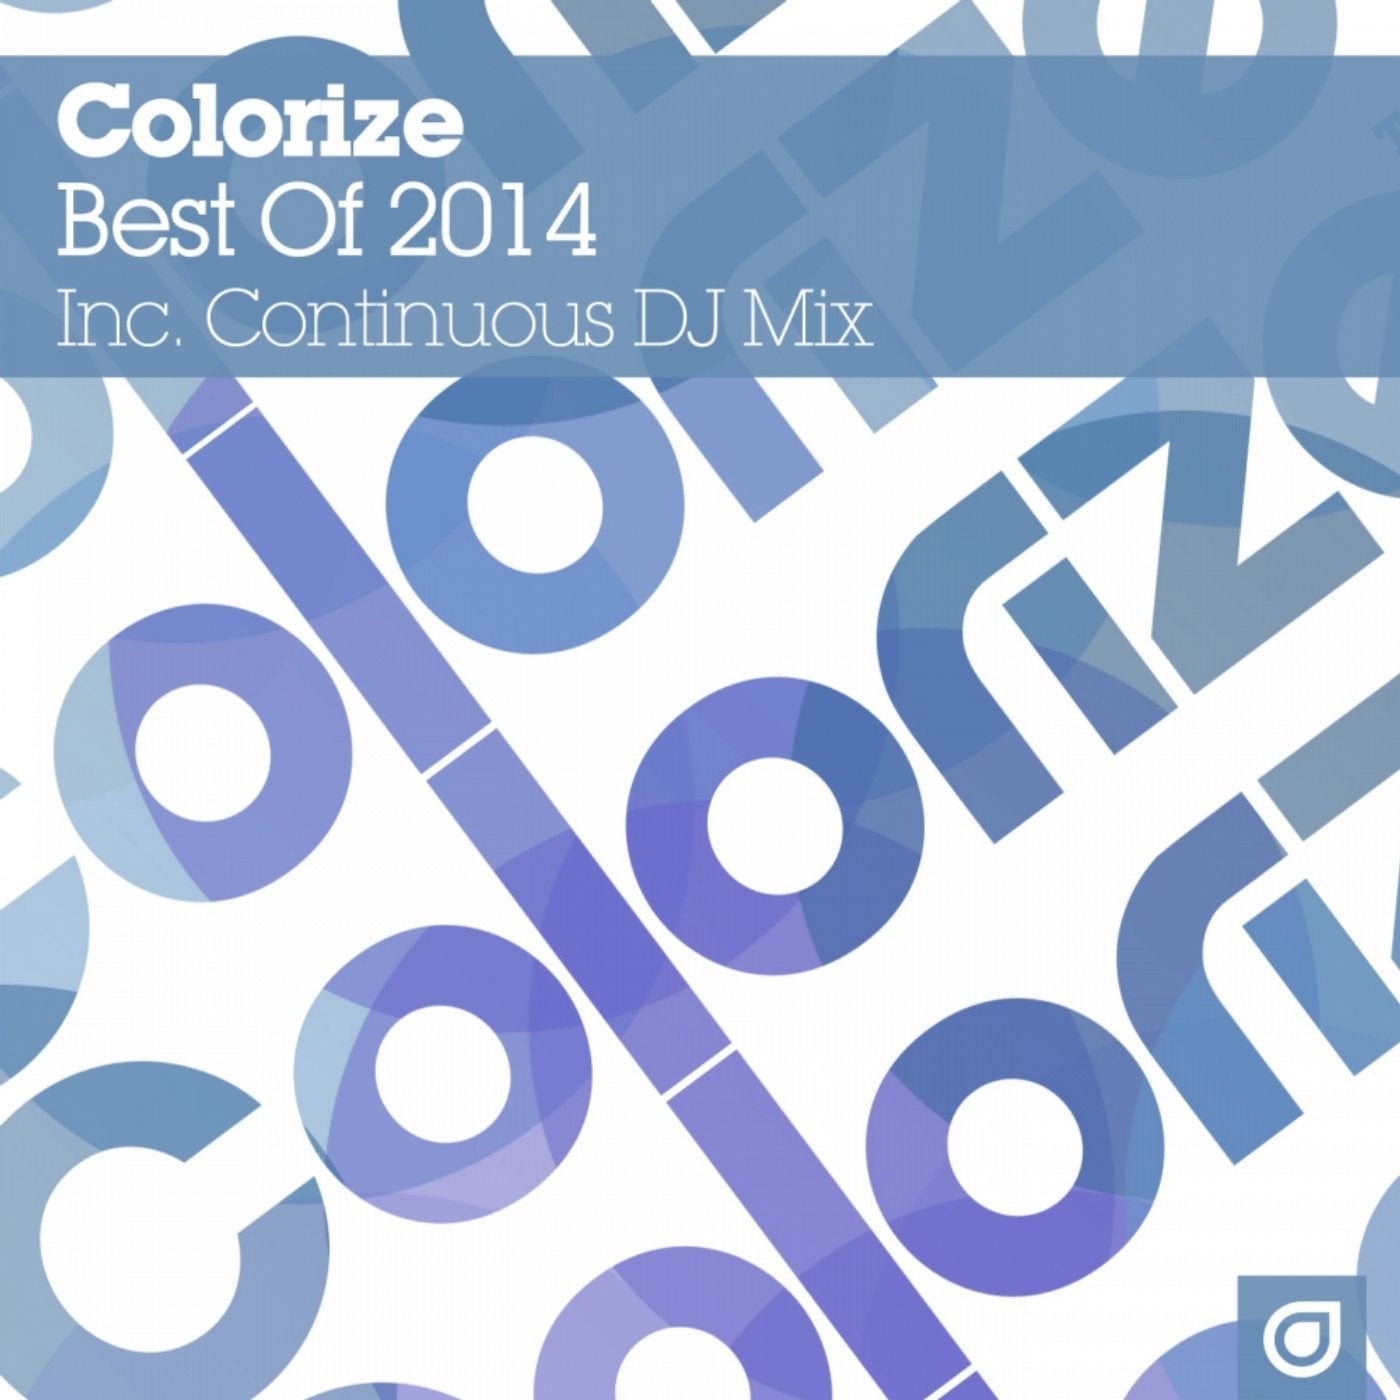 Colorize - Best Of 2014